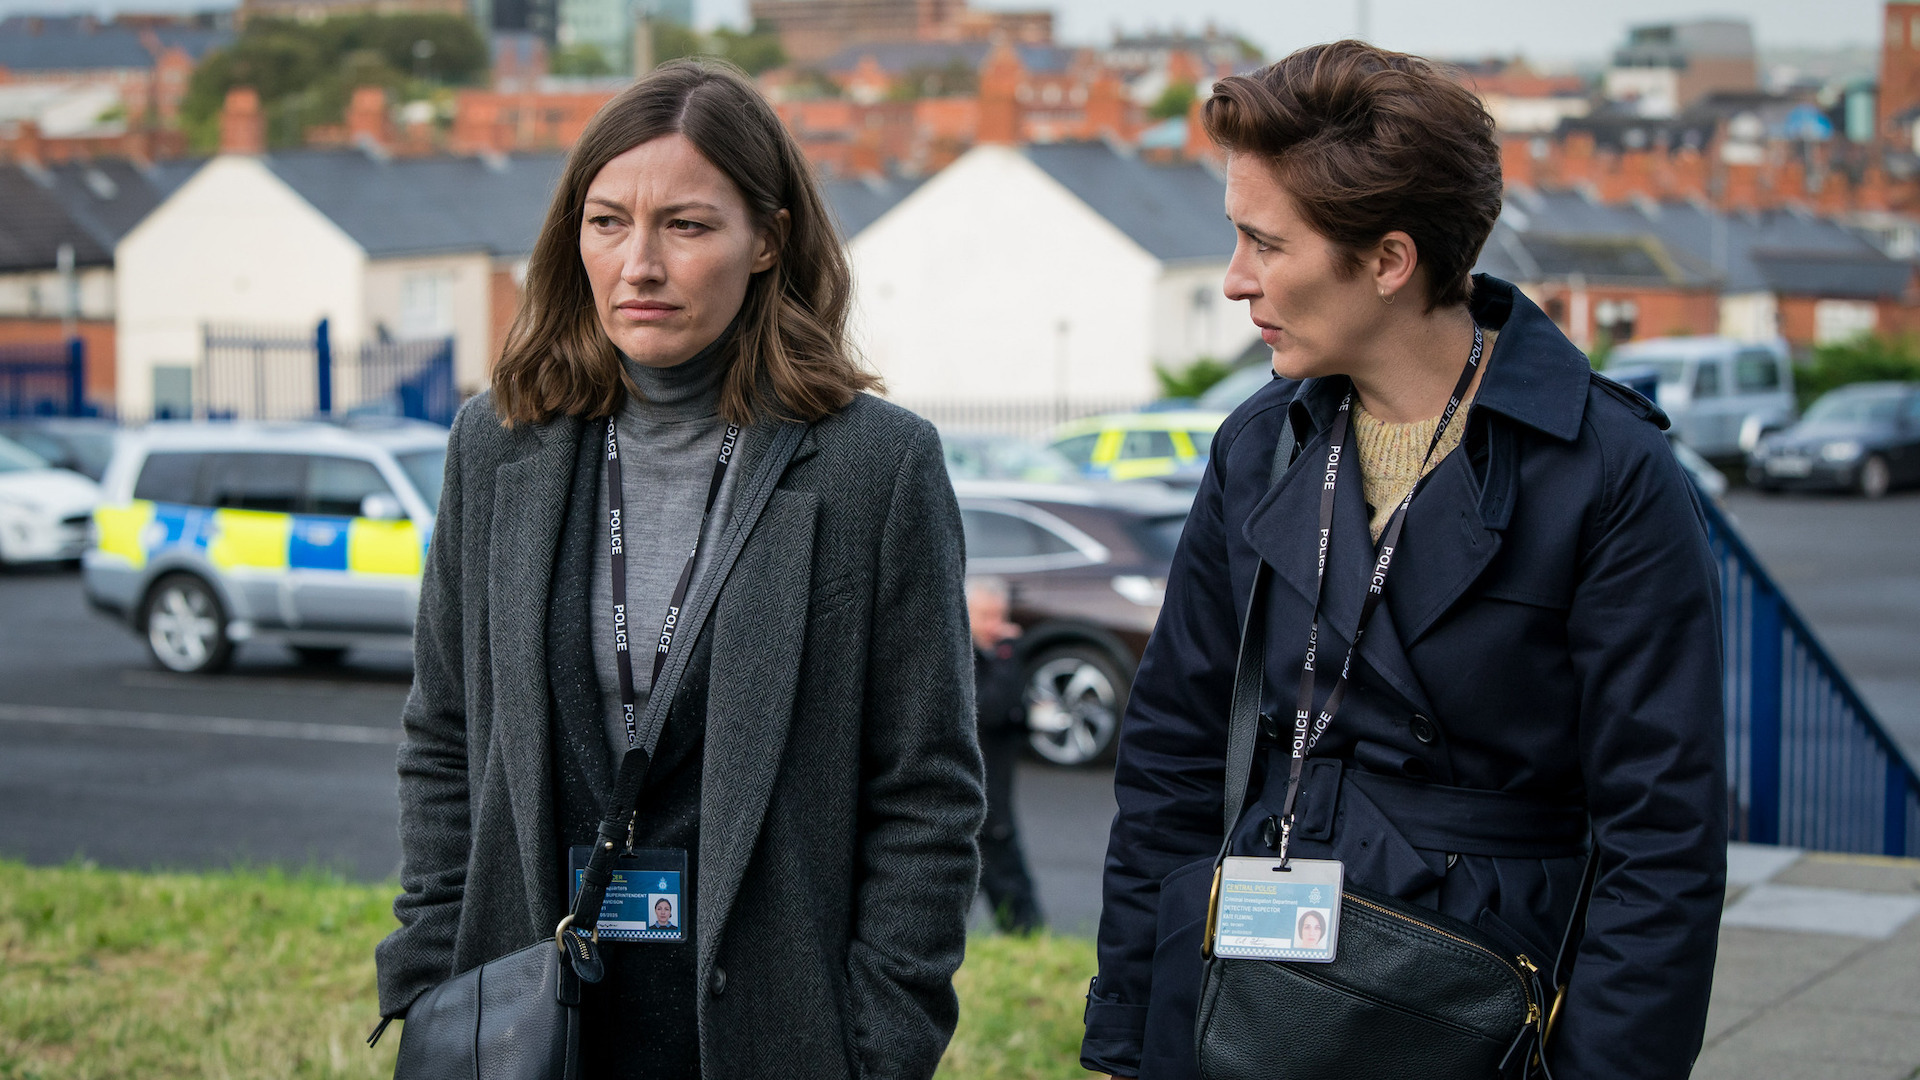 DCI Joanne Davidson (Kelly Macdonald) and DI Kate Fleming (Vicky Mclure) in Season 6 of "Line of Duty."